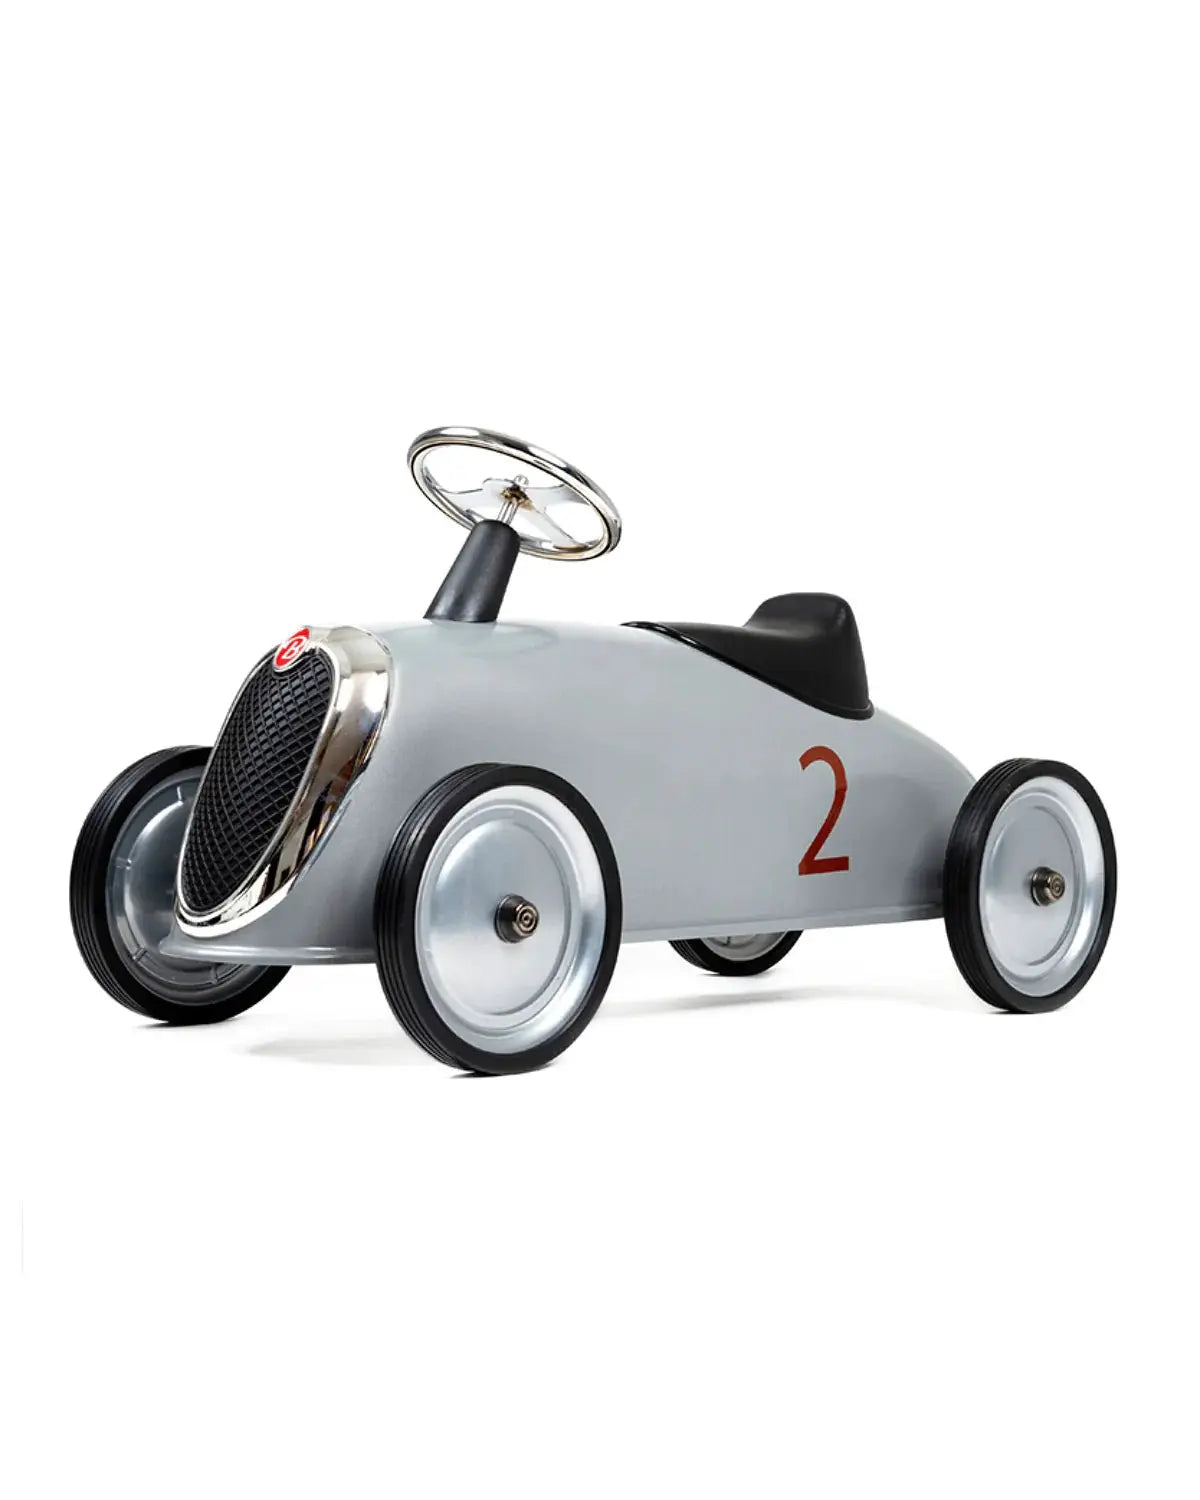 Ride-on Rider Toy Car, Durable Vintage Design, Classic Style, Kids Ride On, Retro Inspired  Baghera Silver  